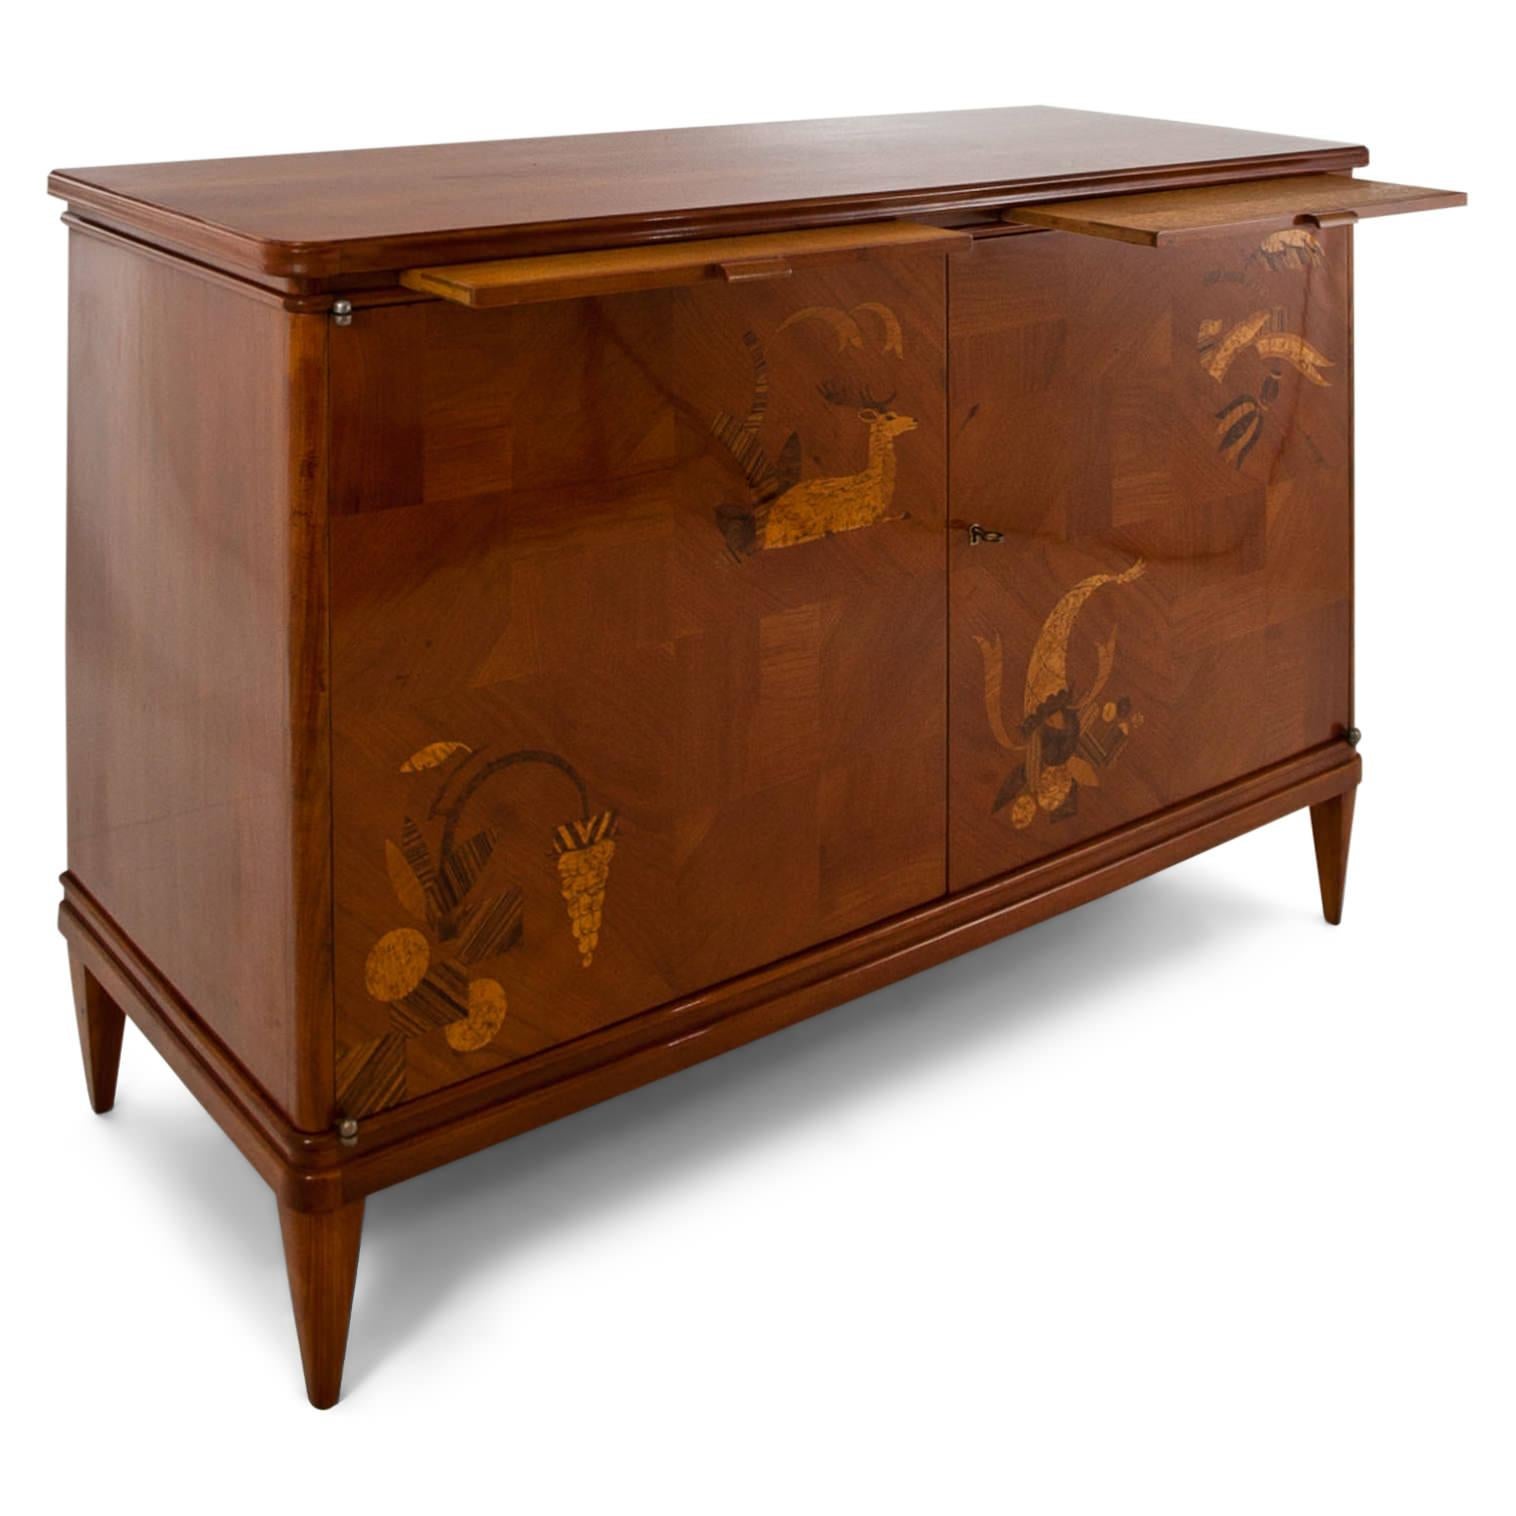 Two-doored cabinet on tapered feet with a parquetry front out of cheerywood and inlays in the shape of plants, vines, a deer and a cornucopia. There are two pullout surfaces directly underneath the top and the interior has one shelf.